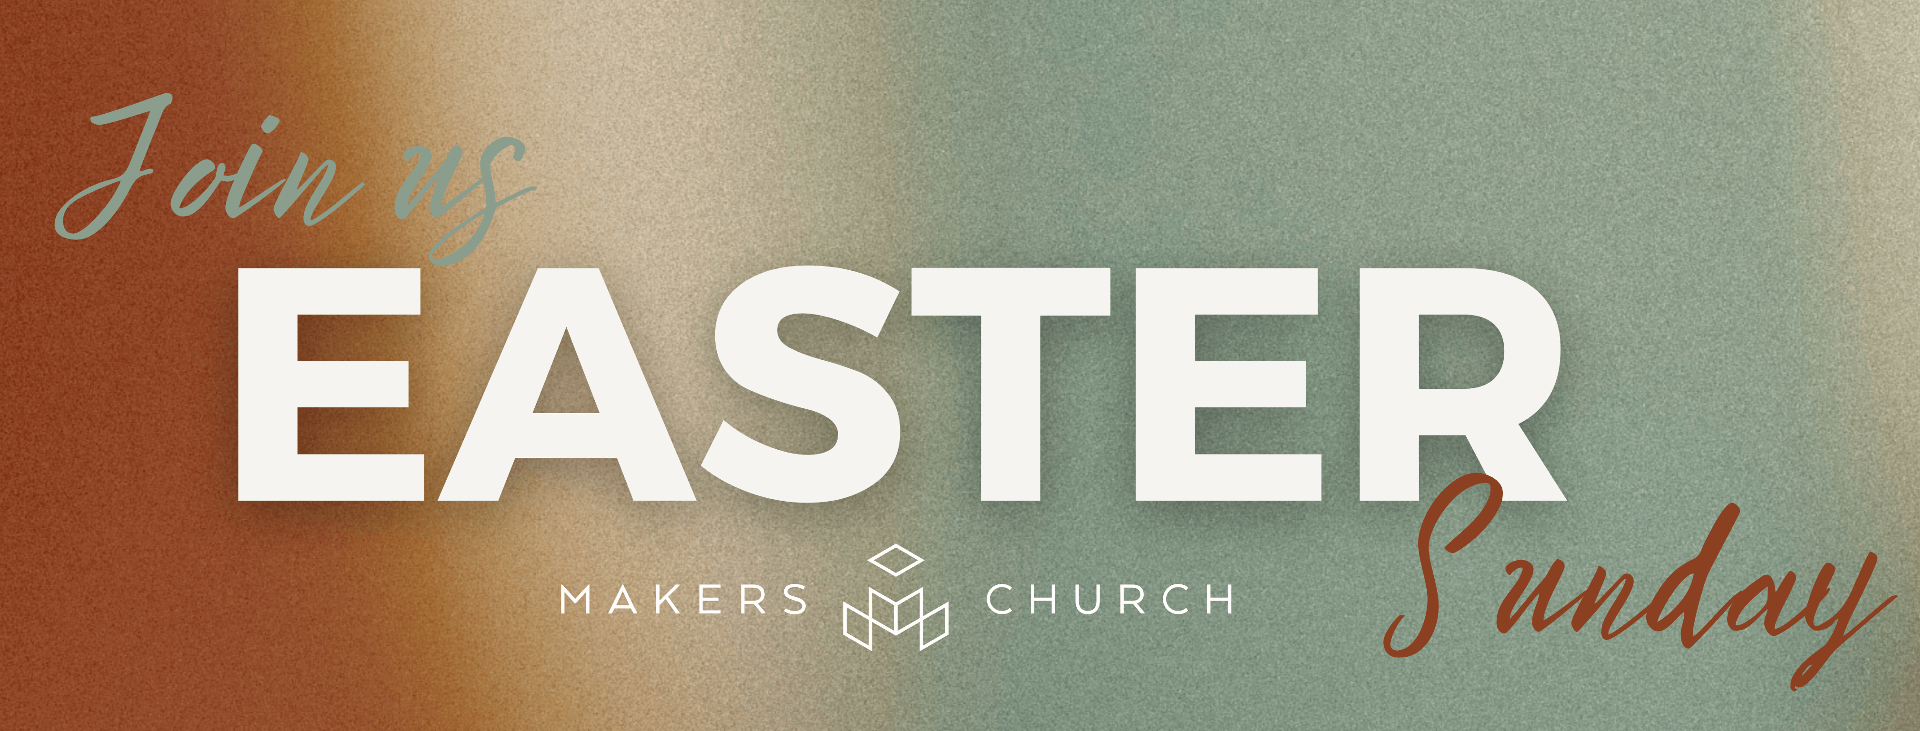 join us for easter at makers church